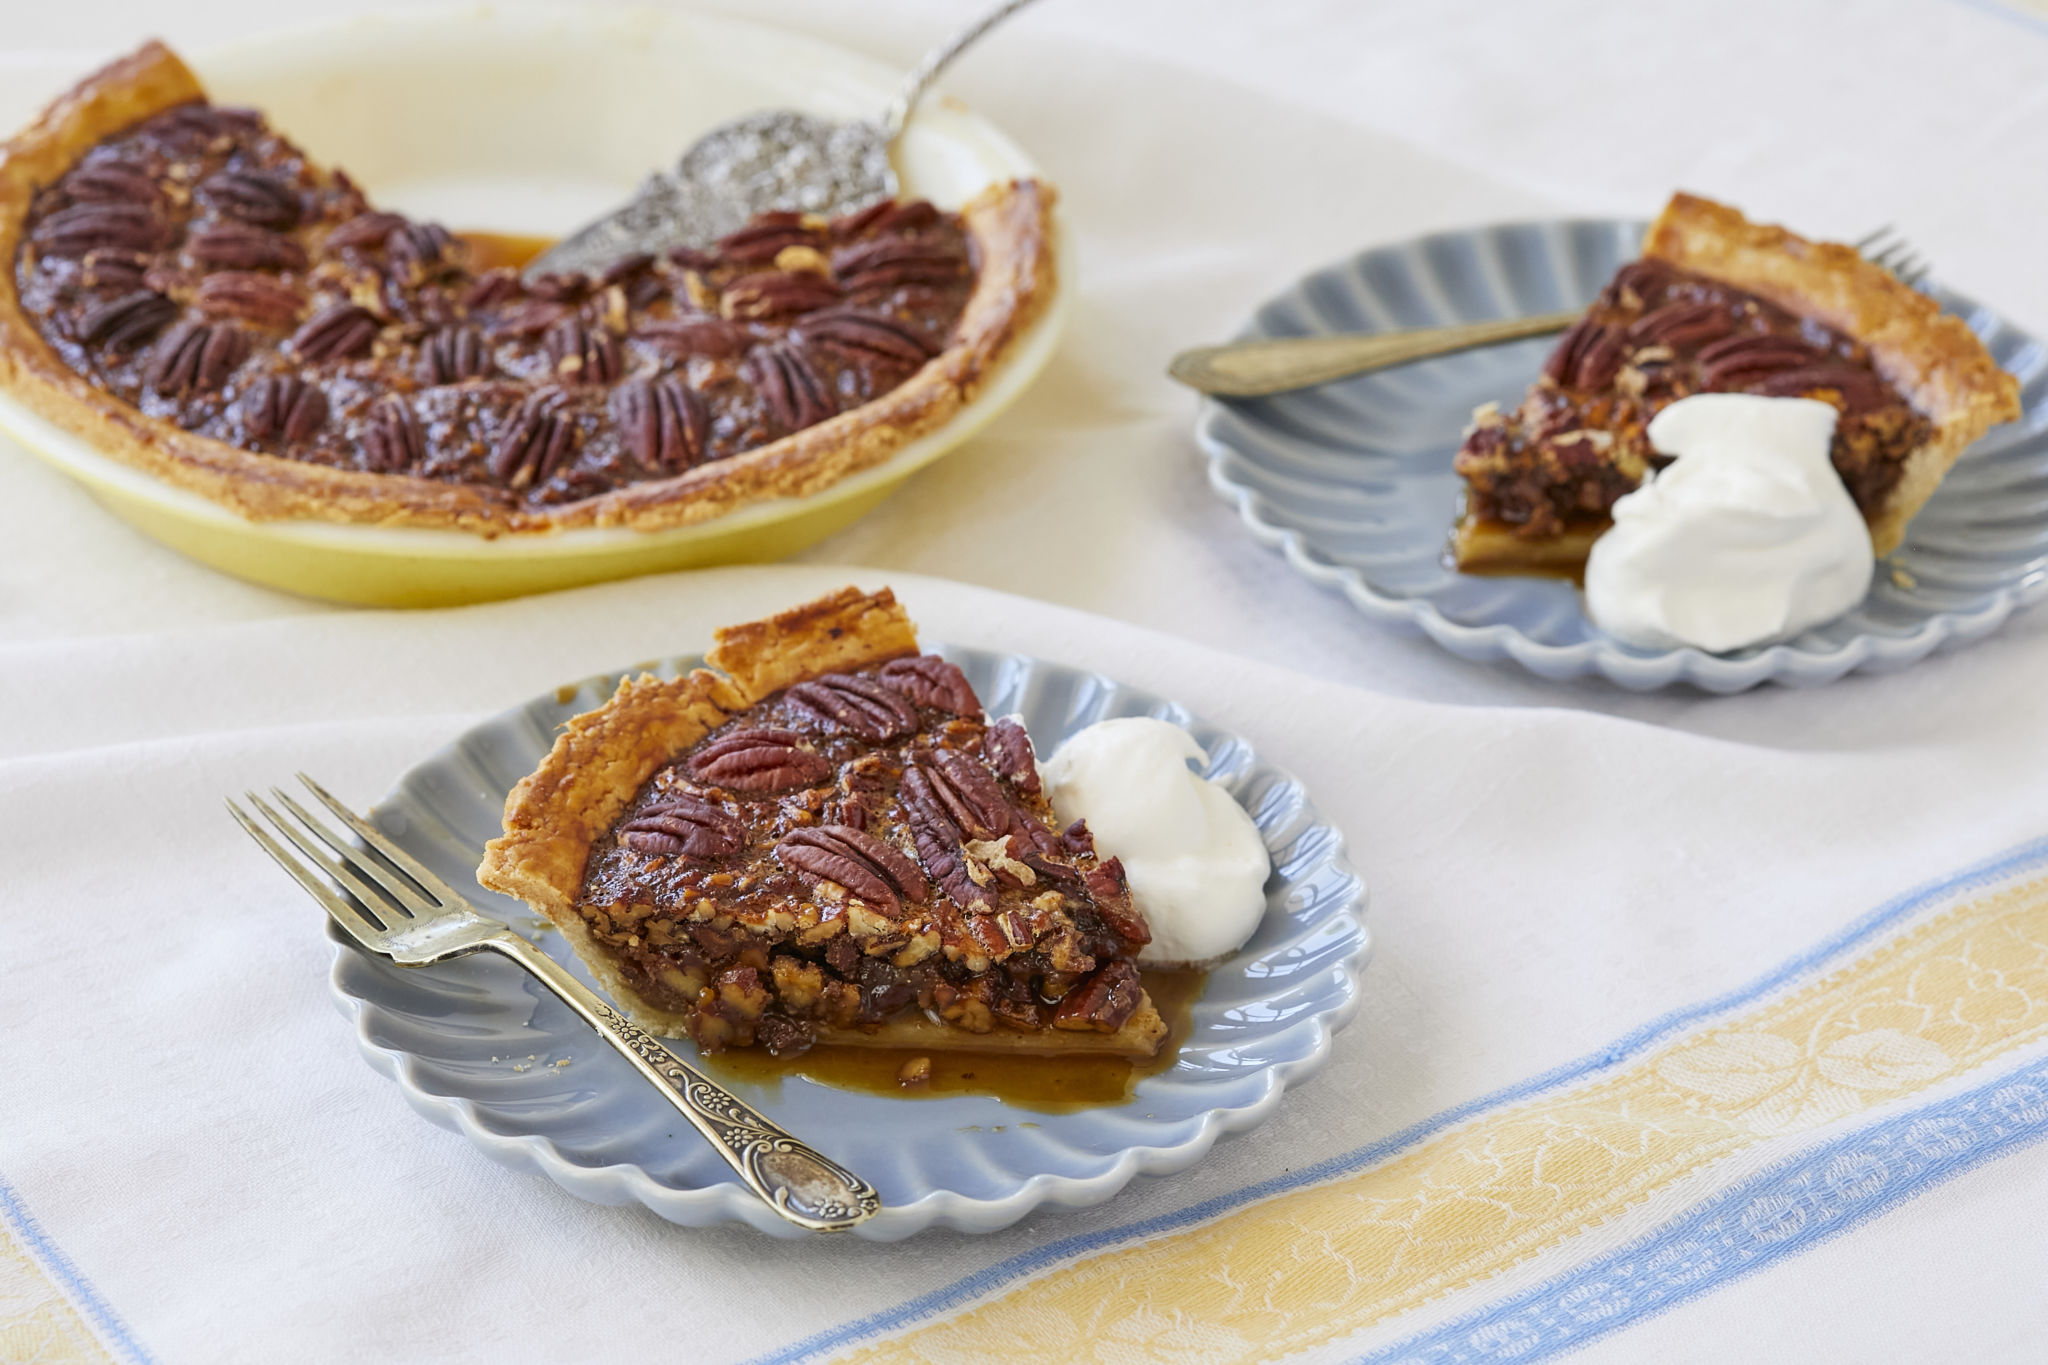 Two slices of homemade pecan pie are served on blue dishes next to the pie tin. There is fresh homemade whipped cream served with the pies.